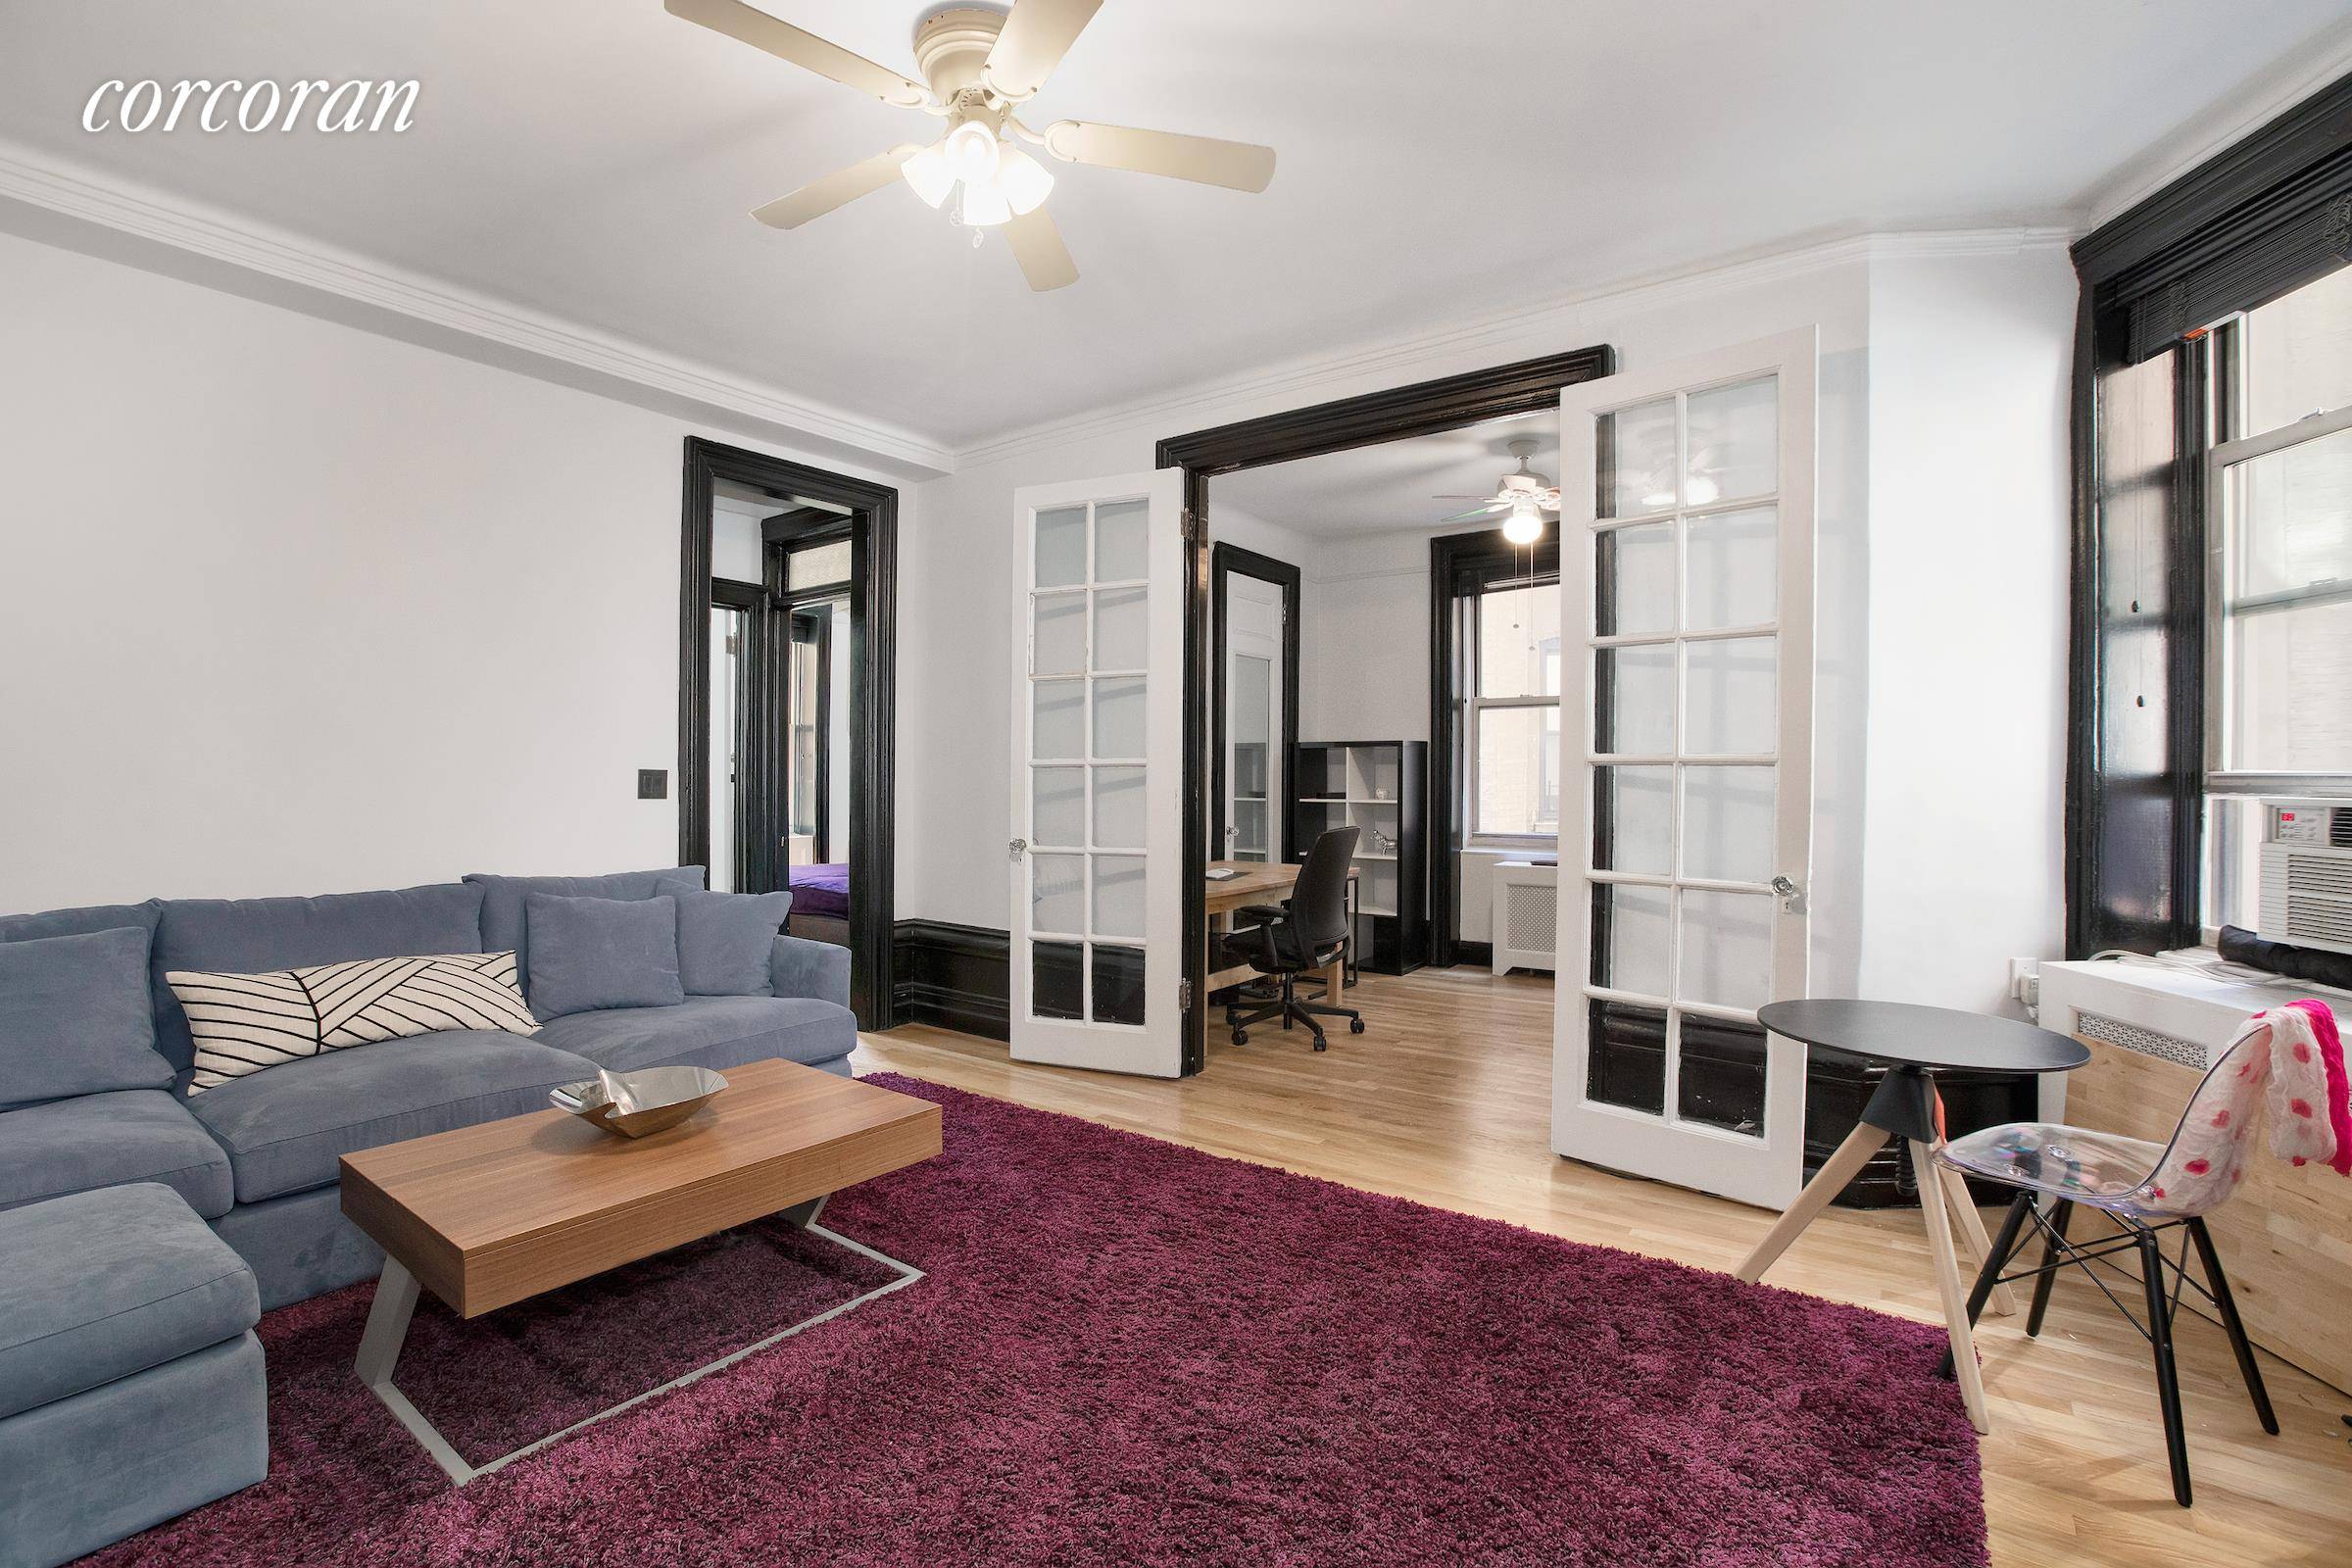 BETWEEN COLUMBIA UNIVERSITY AND RIVERSIDE PARK Right across from Columbia University's front gates, this renovated 2 bedroom with 1 bathroom cooperative is available for sale in one of the area's ...